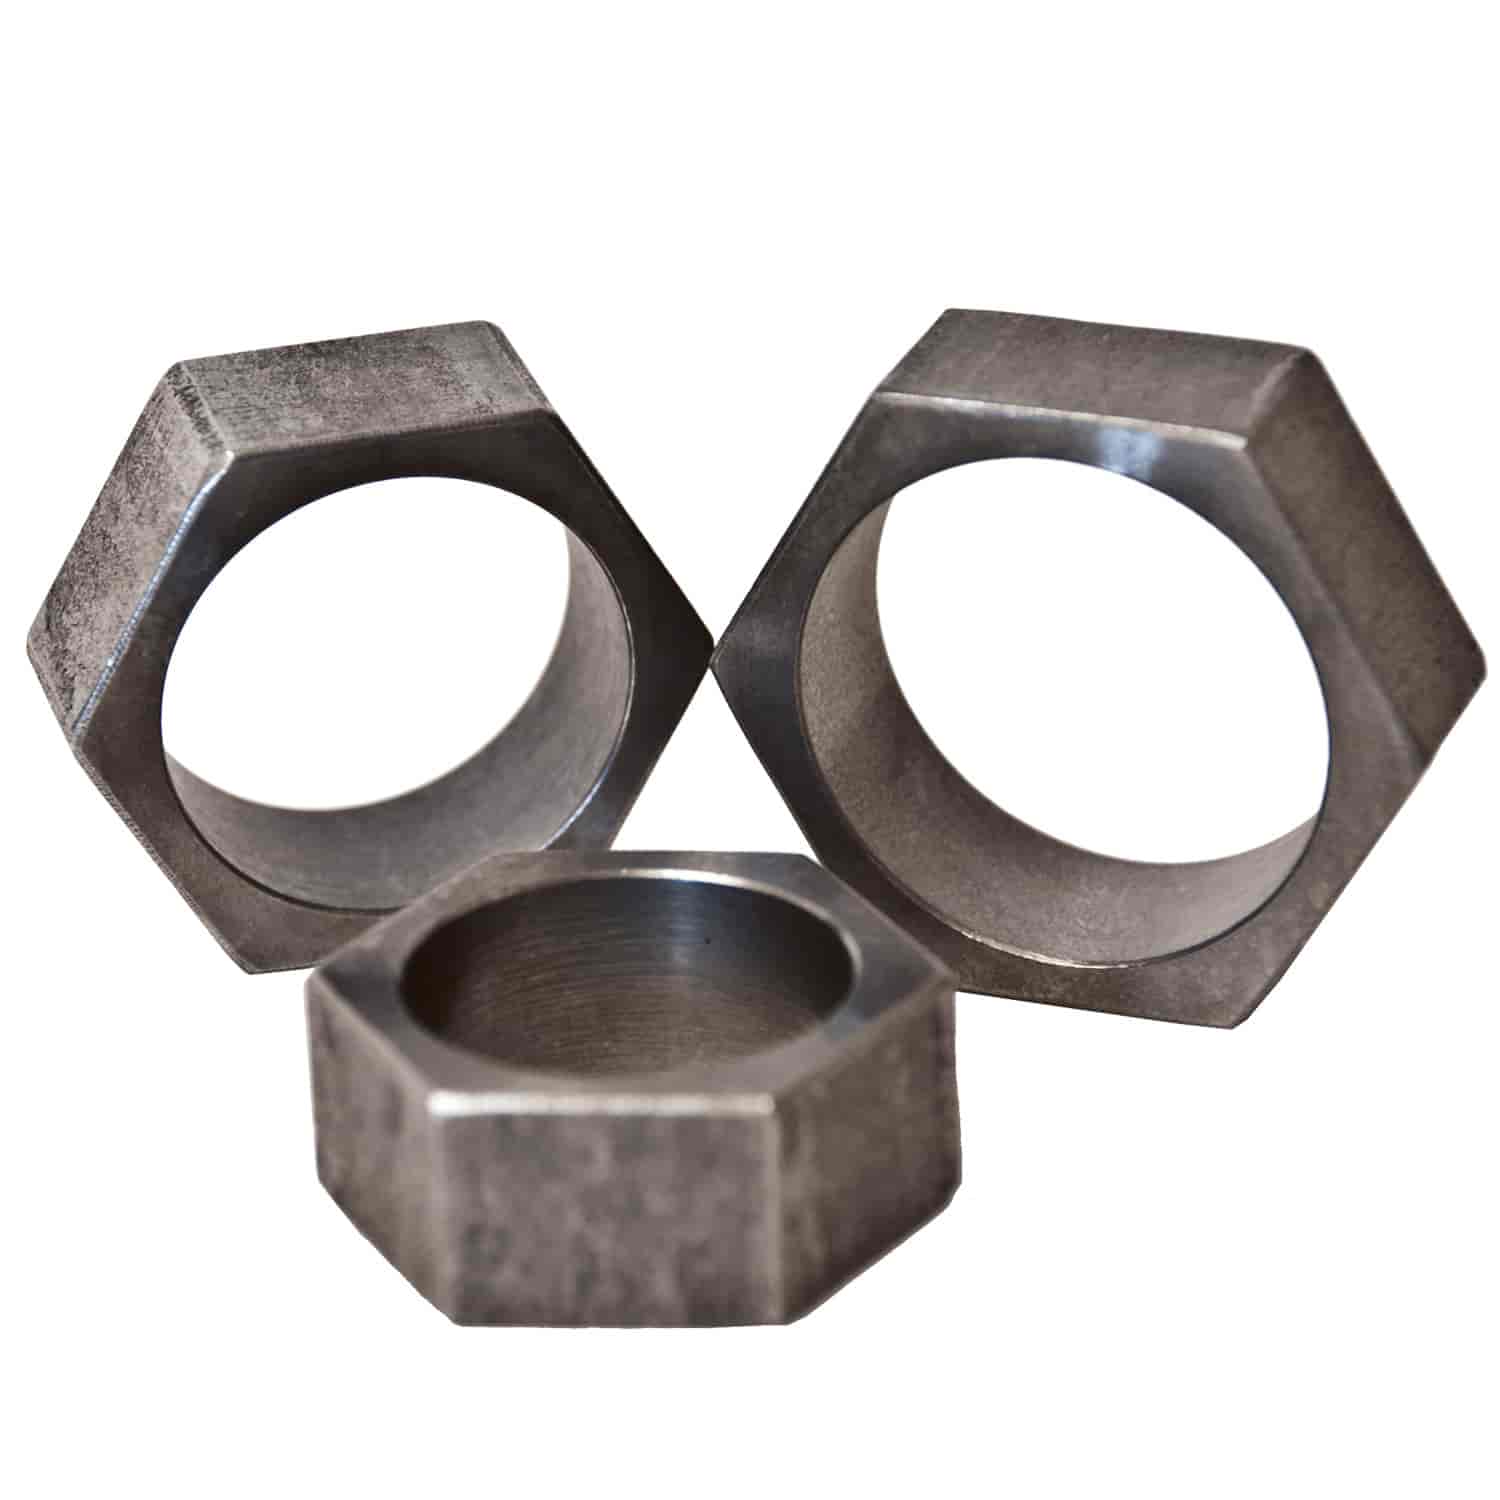 Weld On Wrench Hex For 3/8" OD Tubing